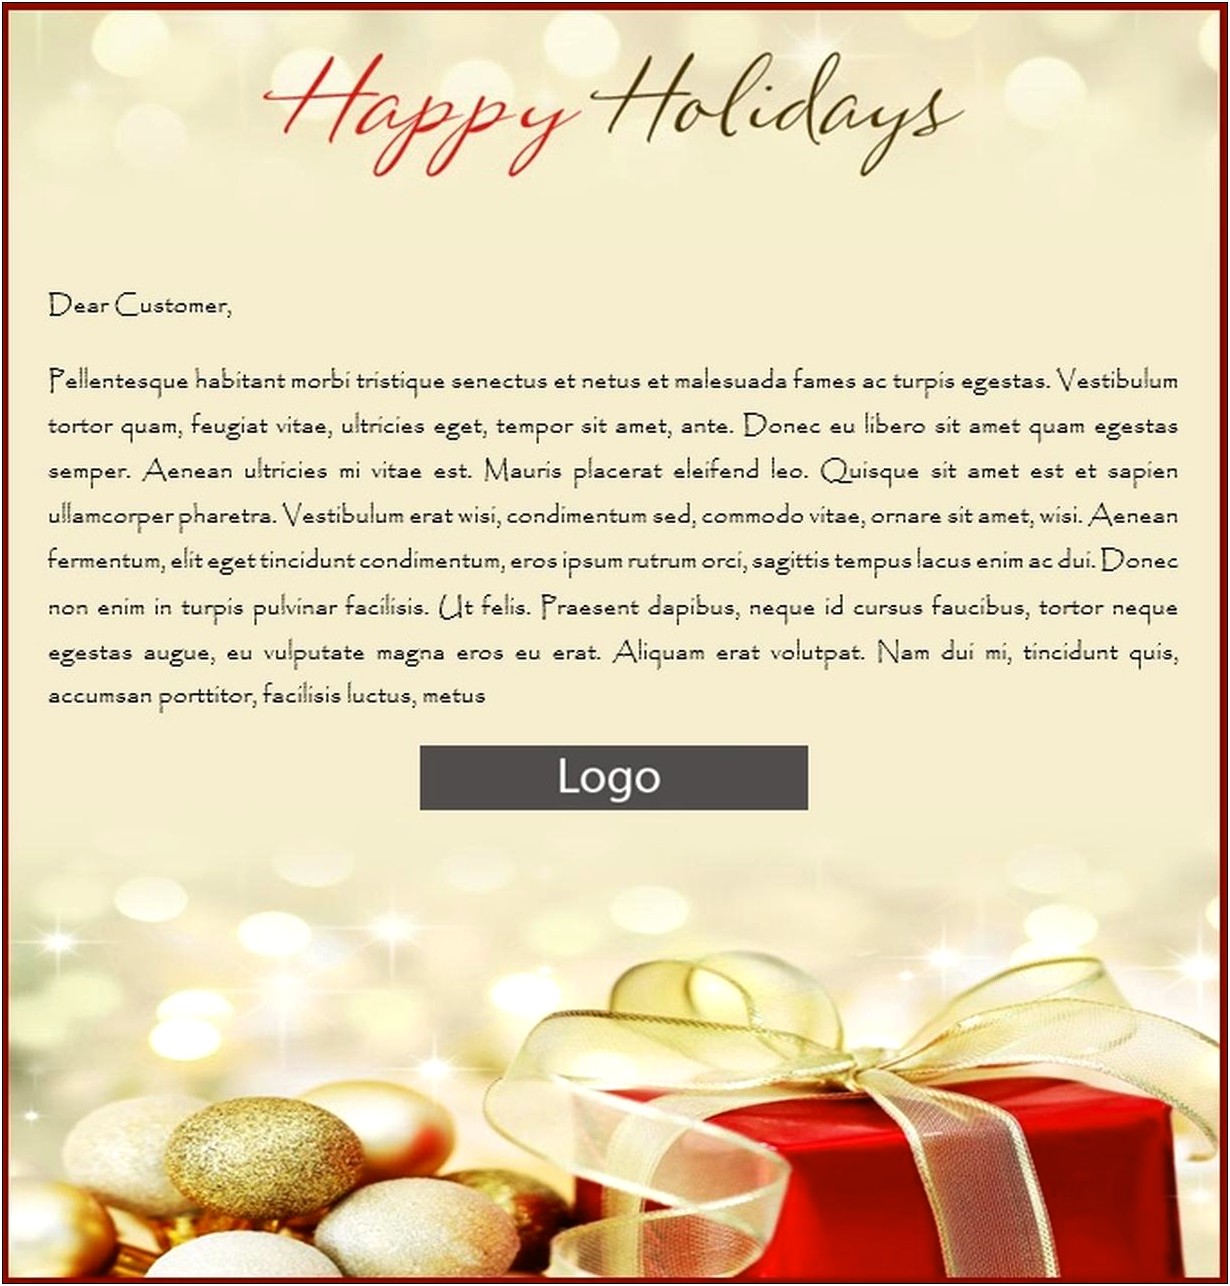 Free Christmas Templates For Outlook Emails